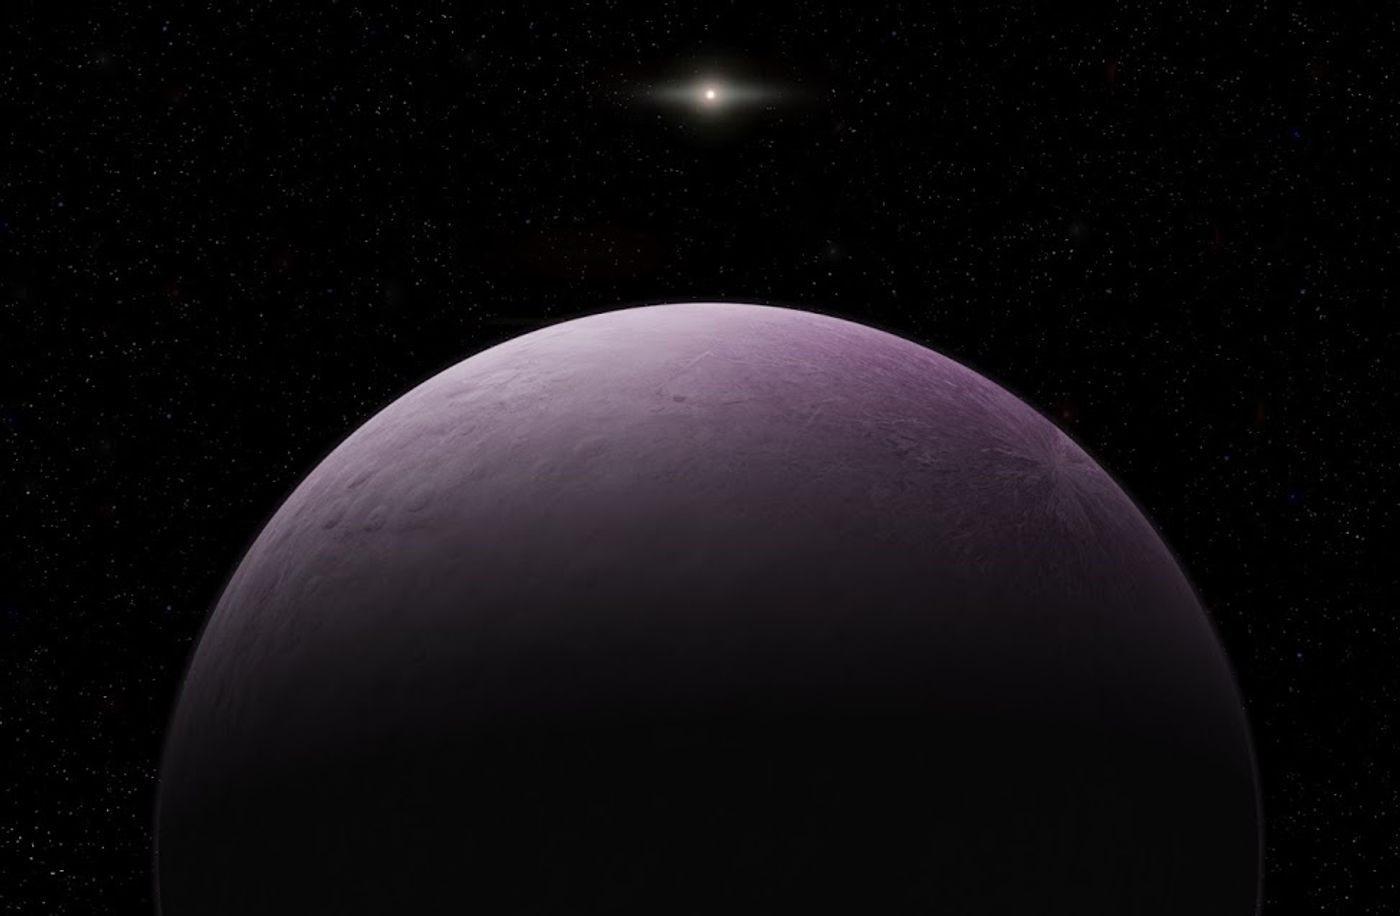 An artist's impression of Farout, the most distant object ever observed in our solar system.